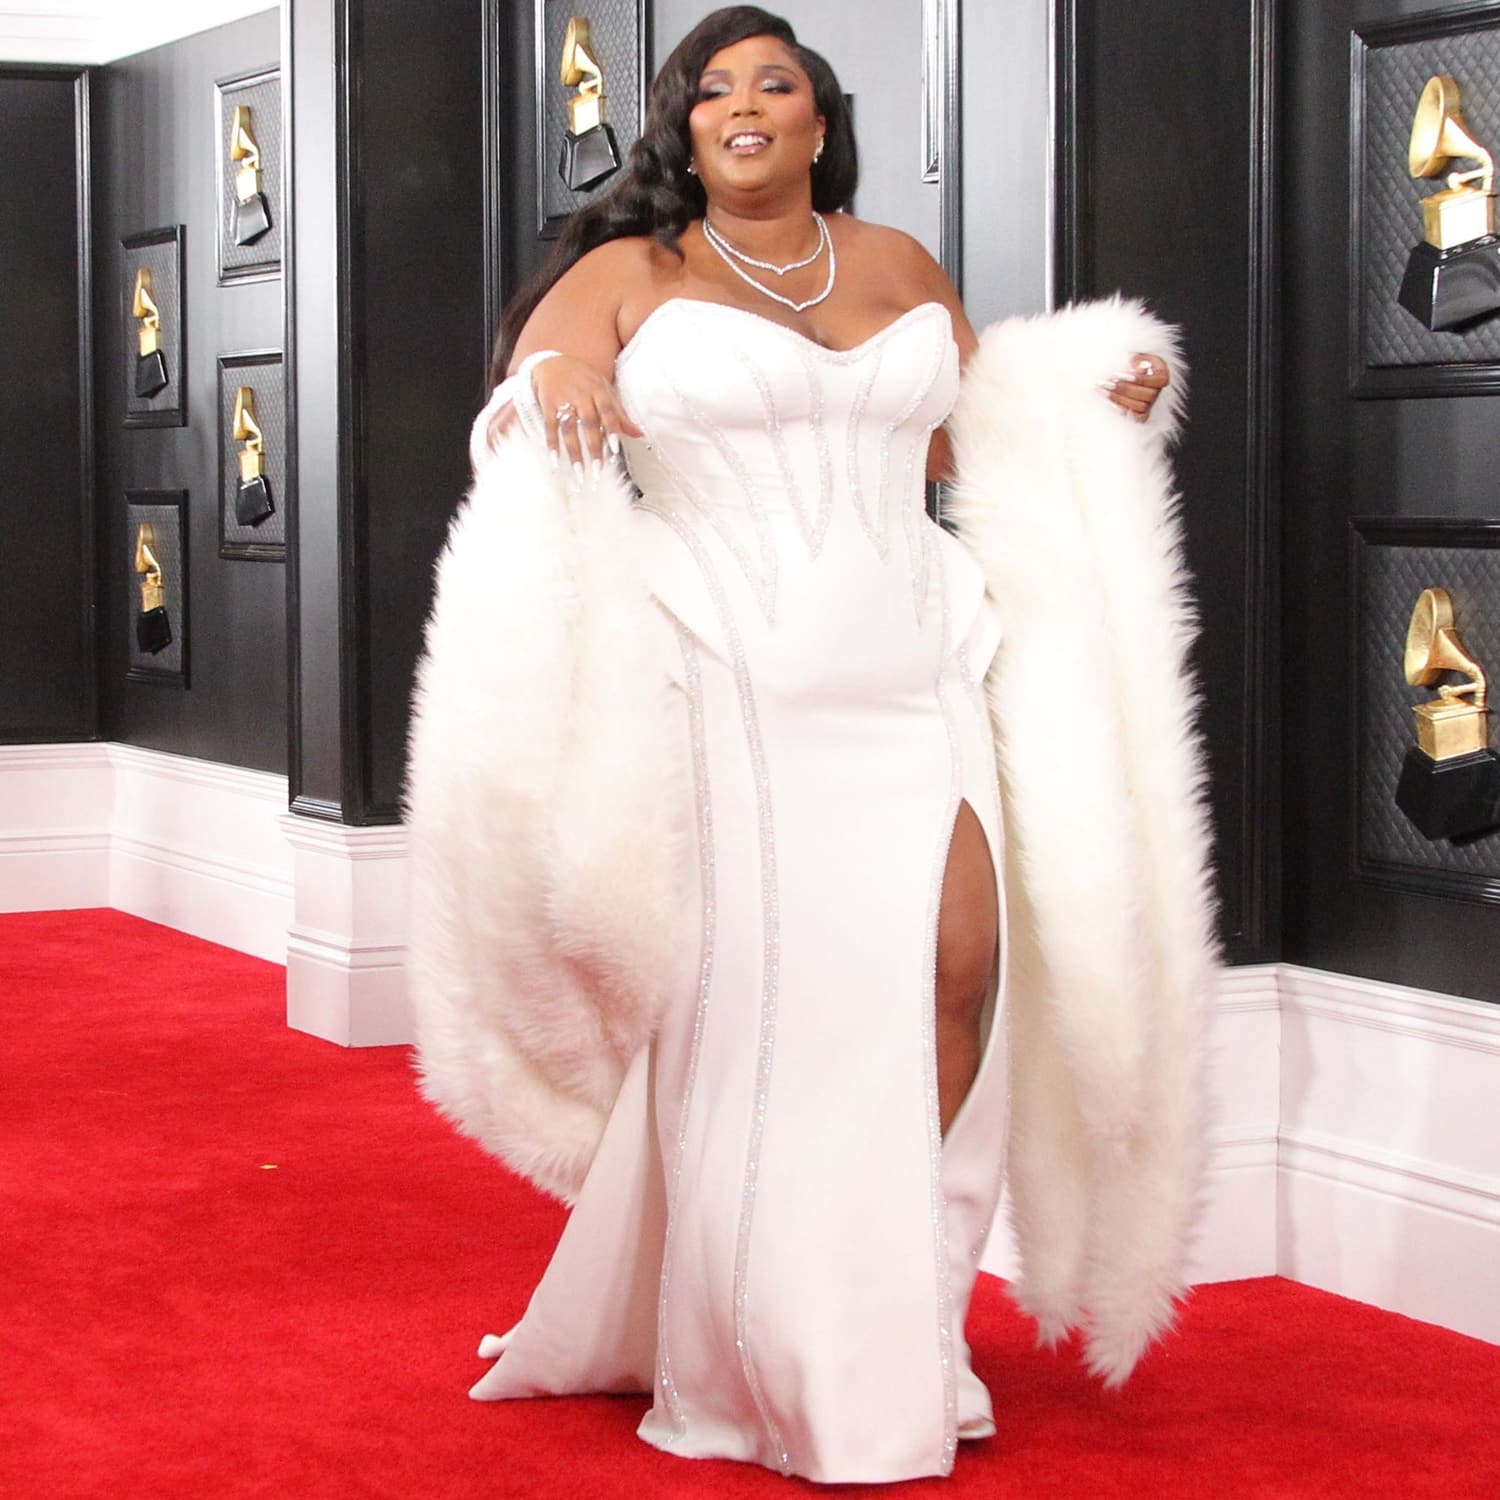 Lizzo wears a white Atelier Versace gown with Lorraine Schwartz jewelry and René Caovilla ‘Cleo’ sandals at the 62nd Annual GRAMMY Awards